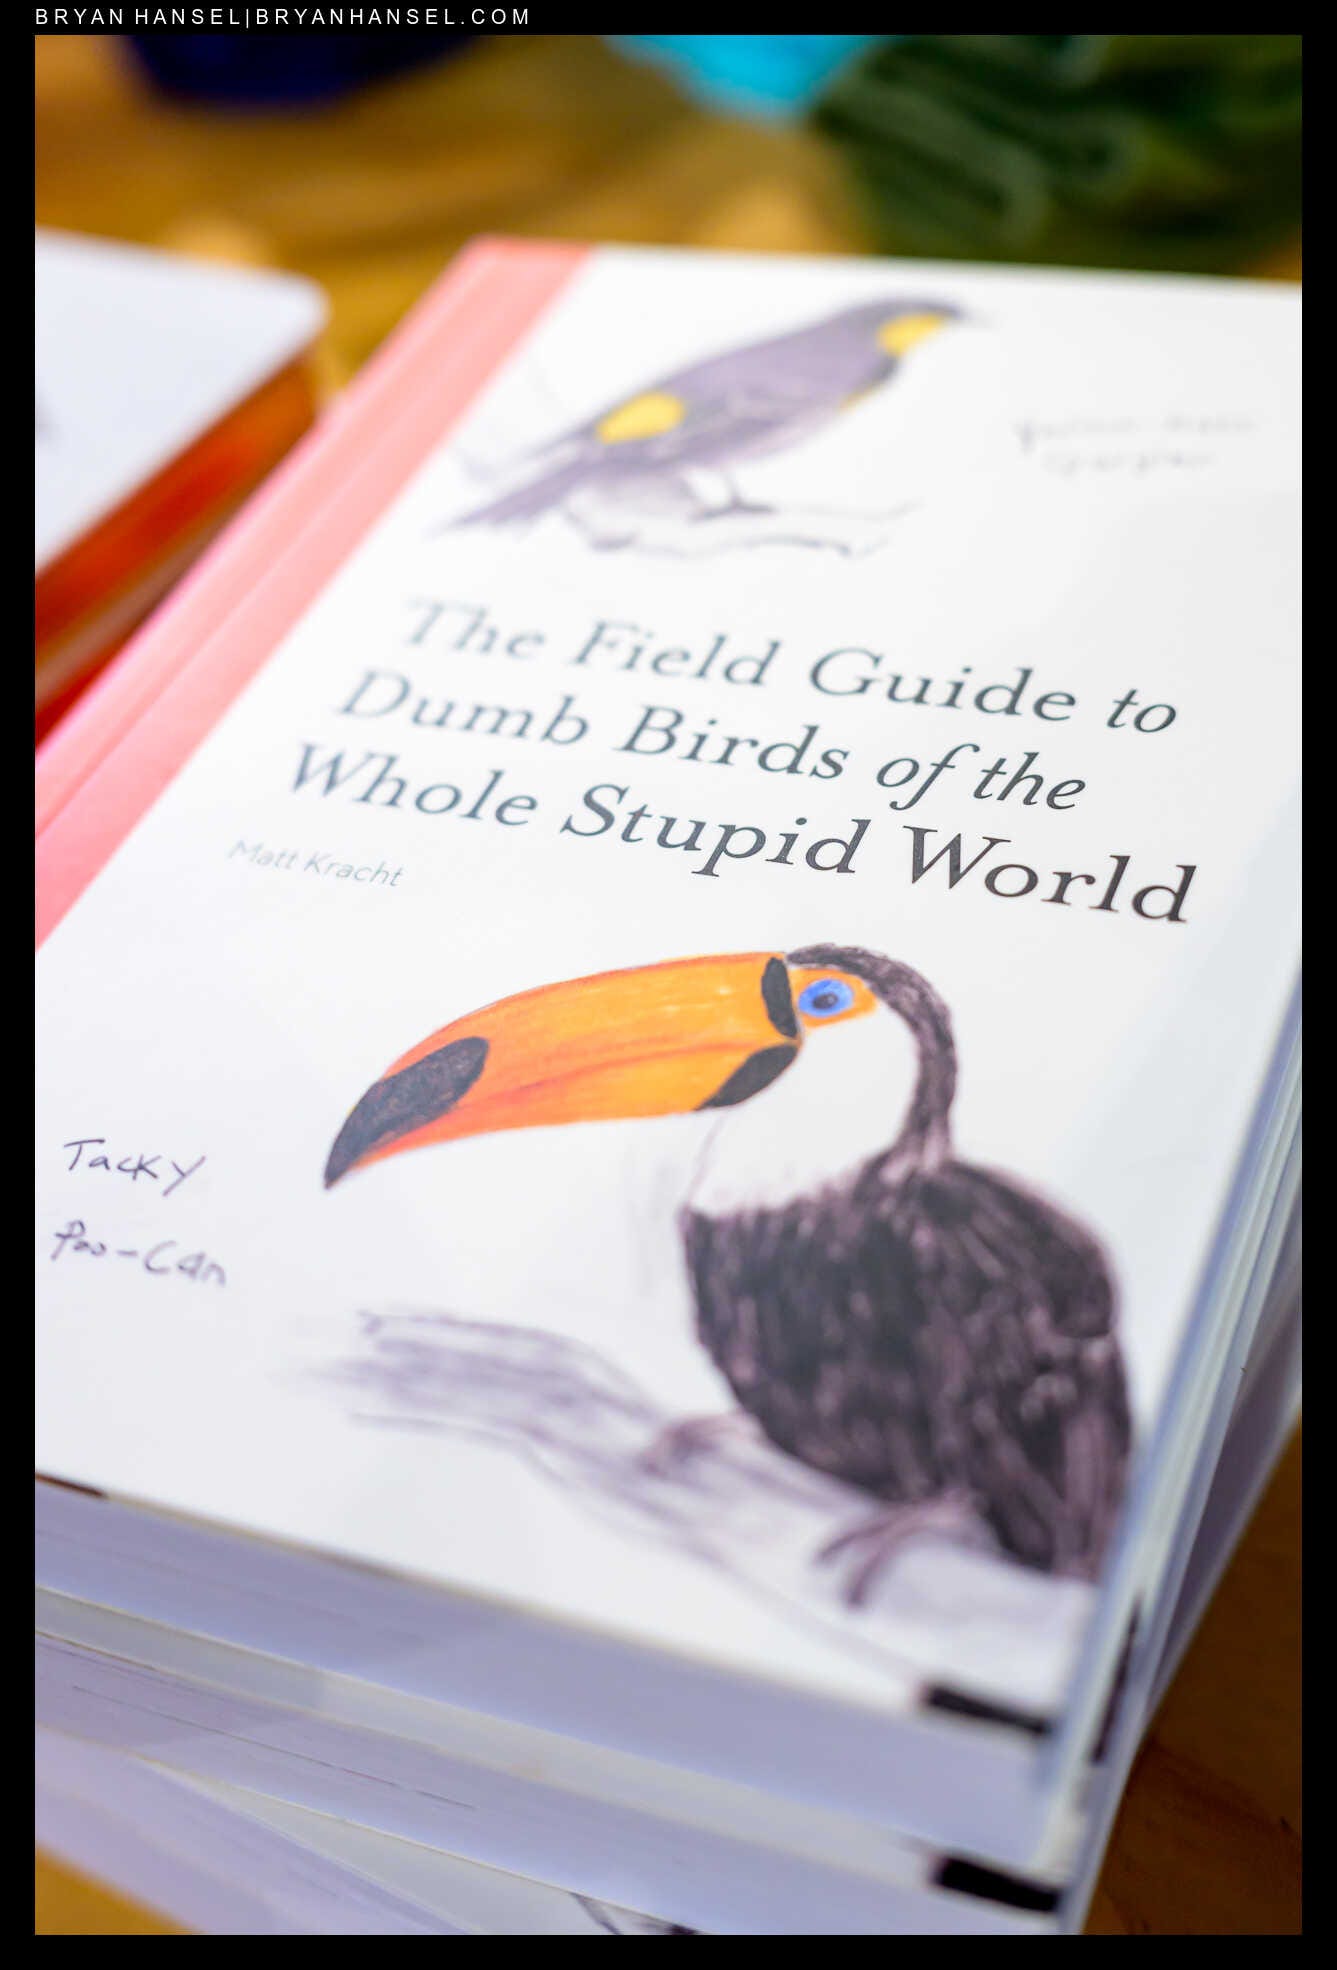 A photo shows the book The Field Guide to Dumb Birds of the Whole Stupid World